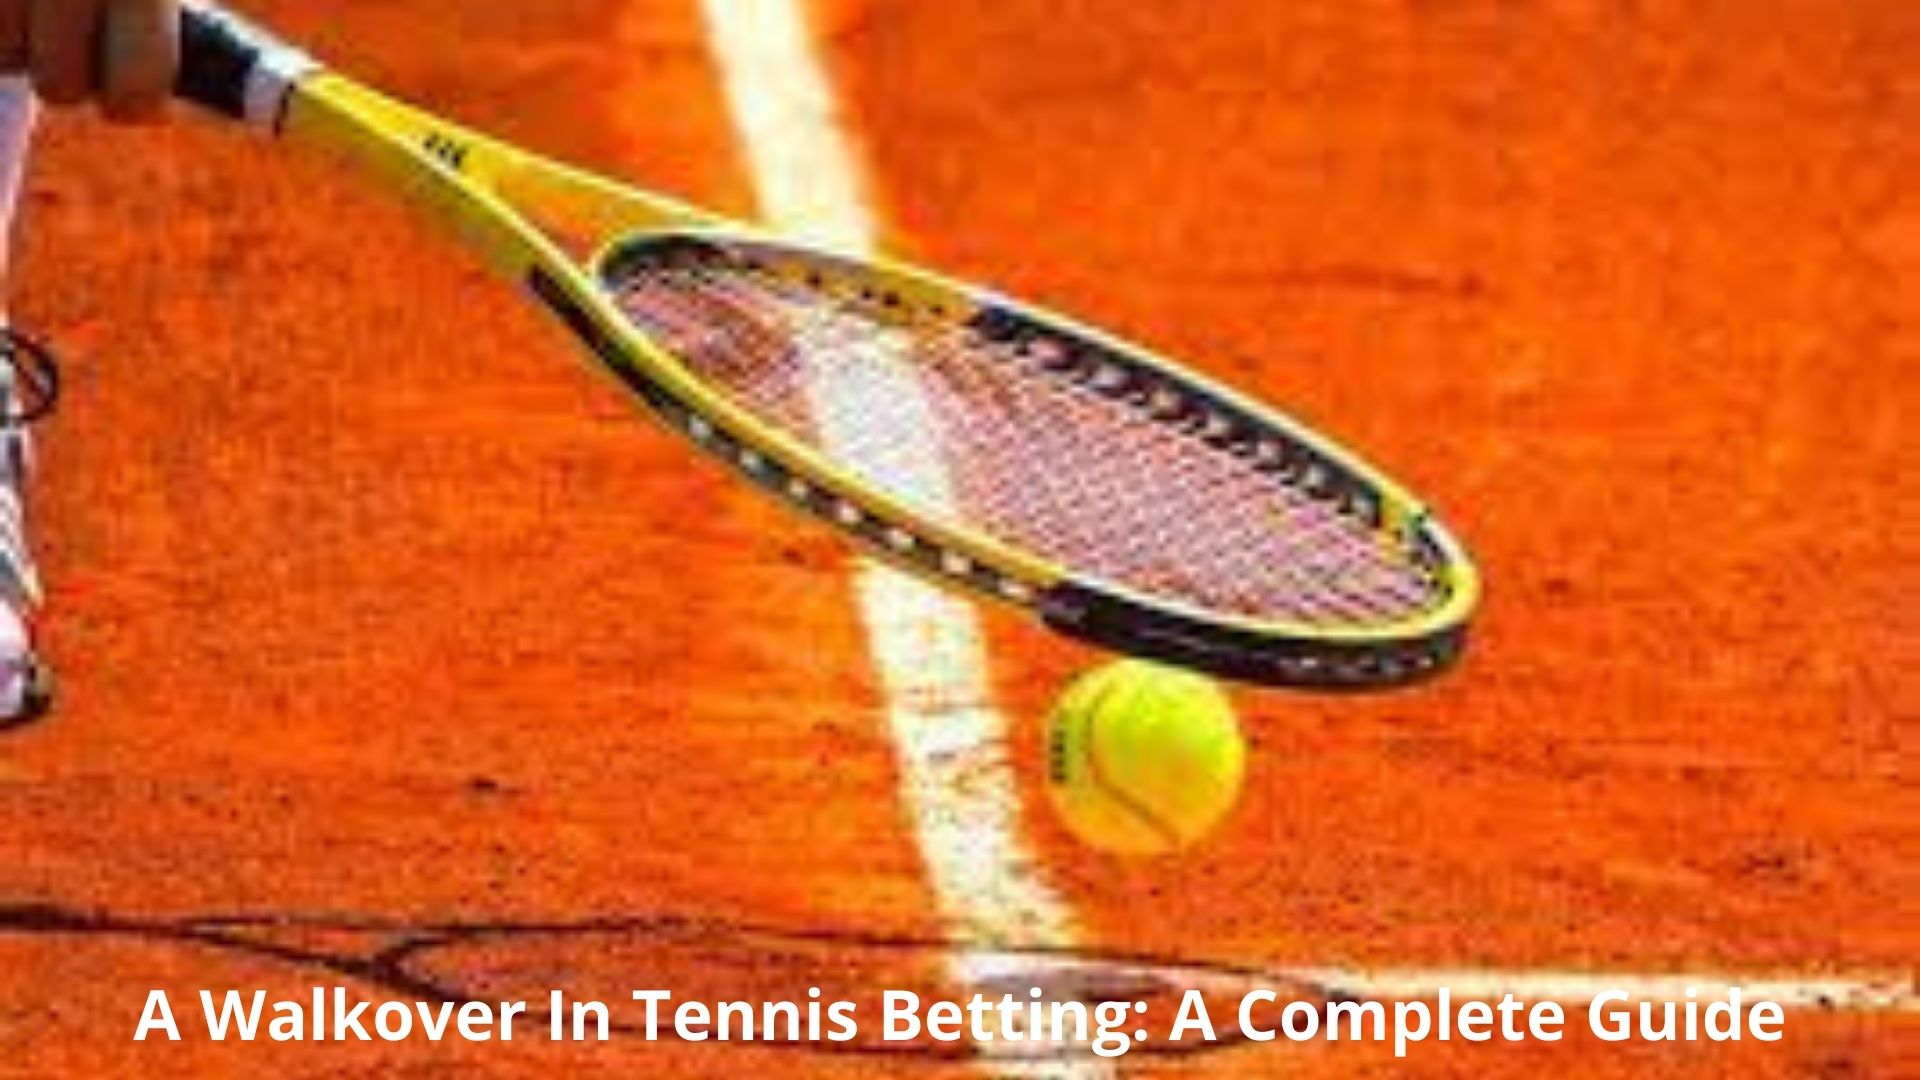 A Walkover In Tennis Betting